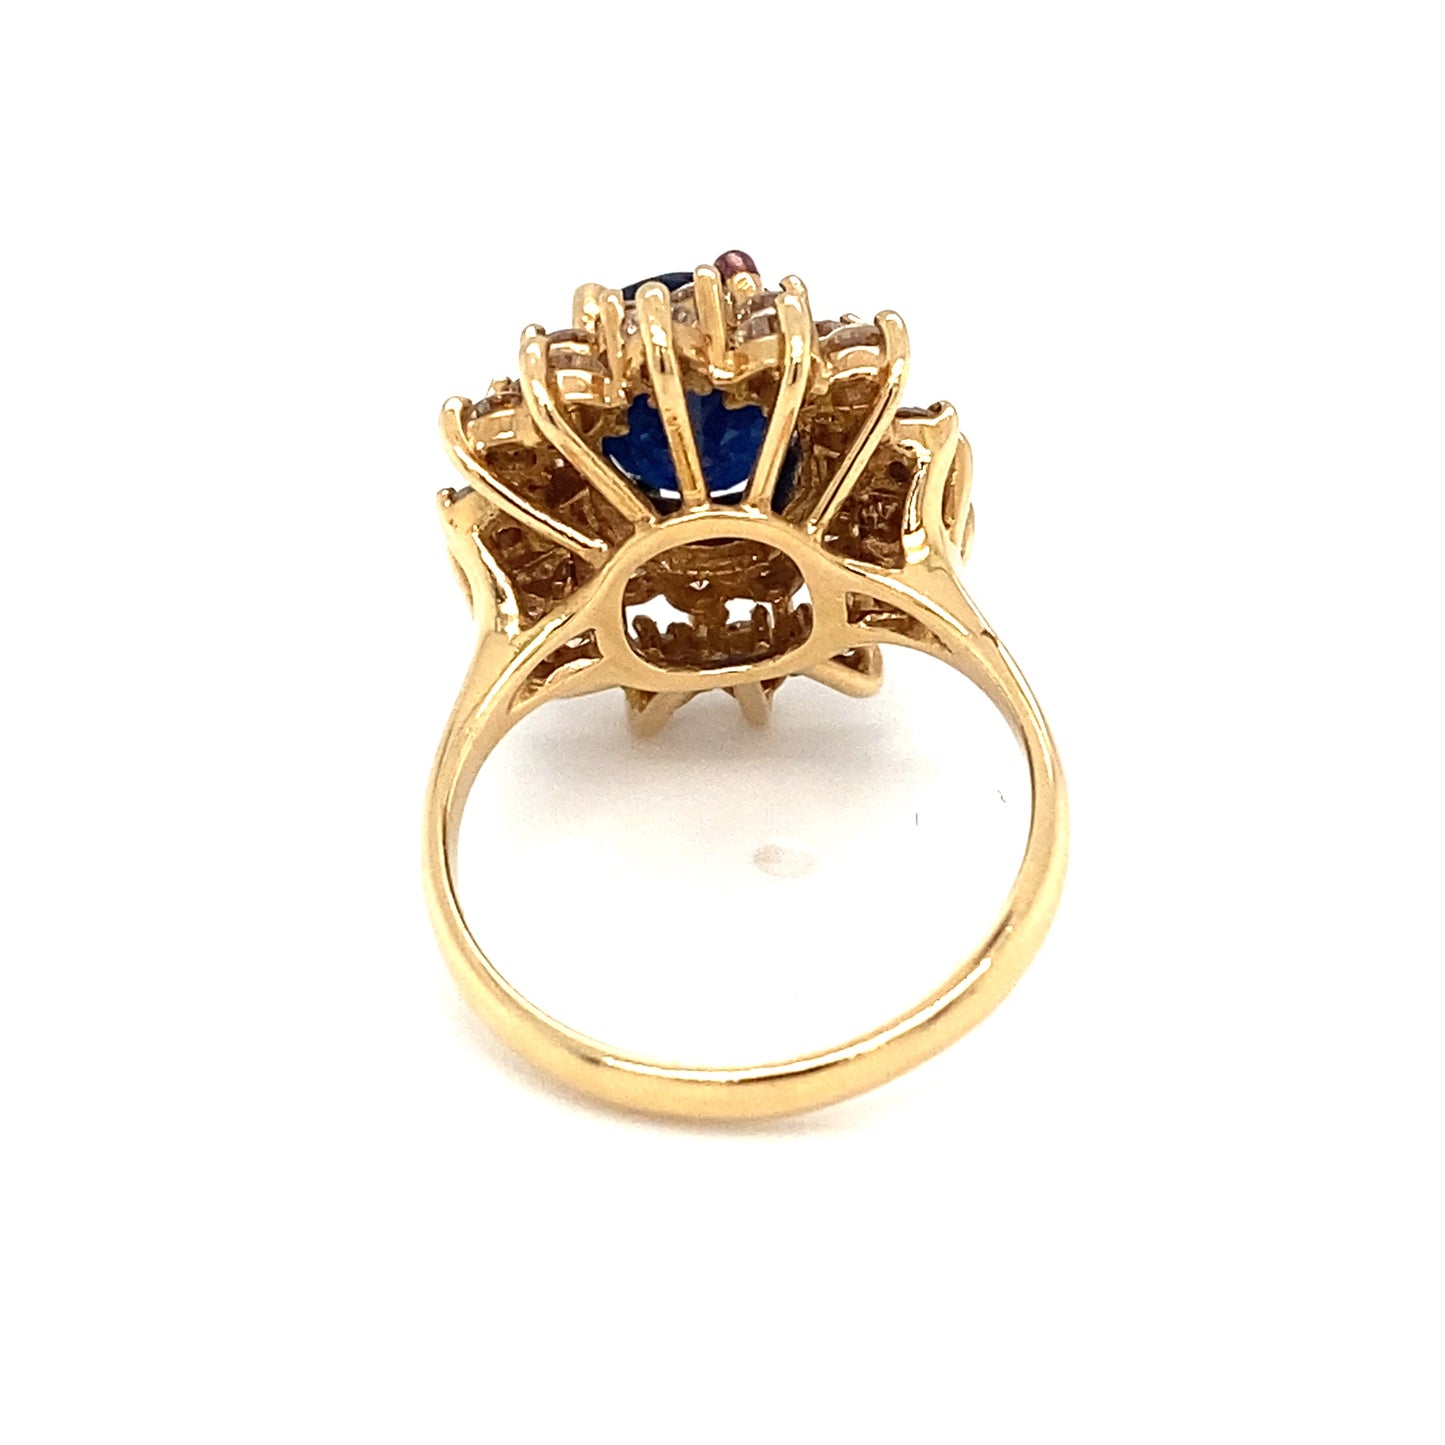 Circa 1980s 2.5ct Oval Sapphire and Diamond Cocktail Ring in 14K Gold